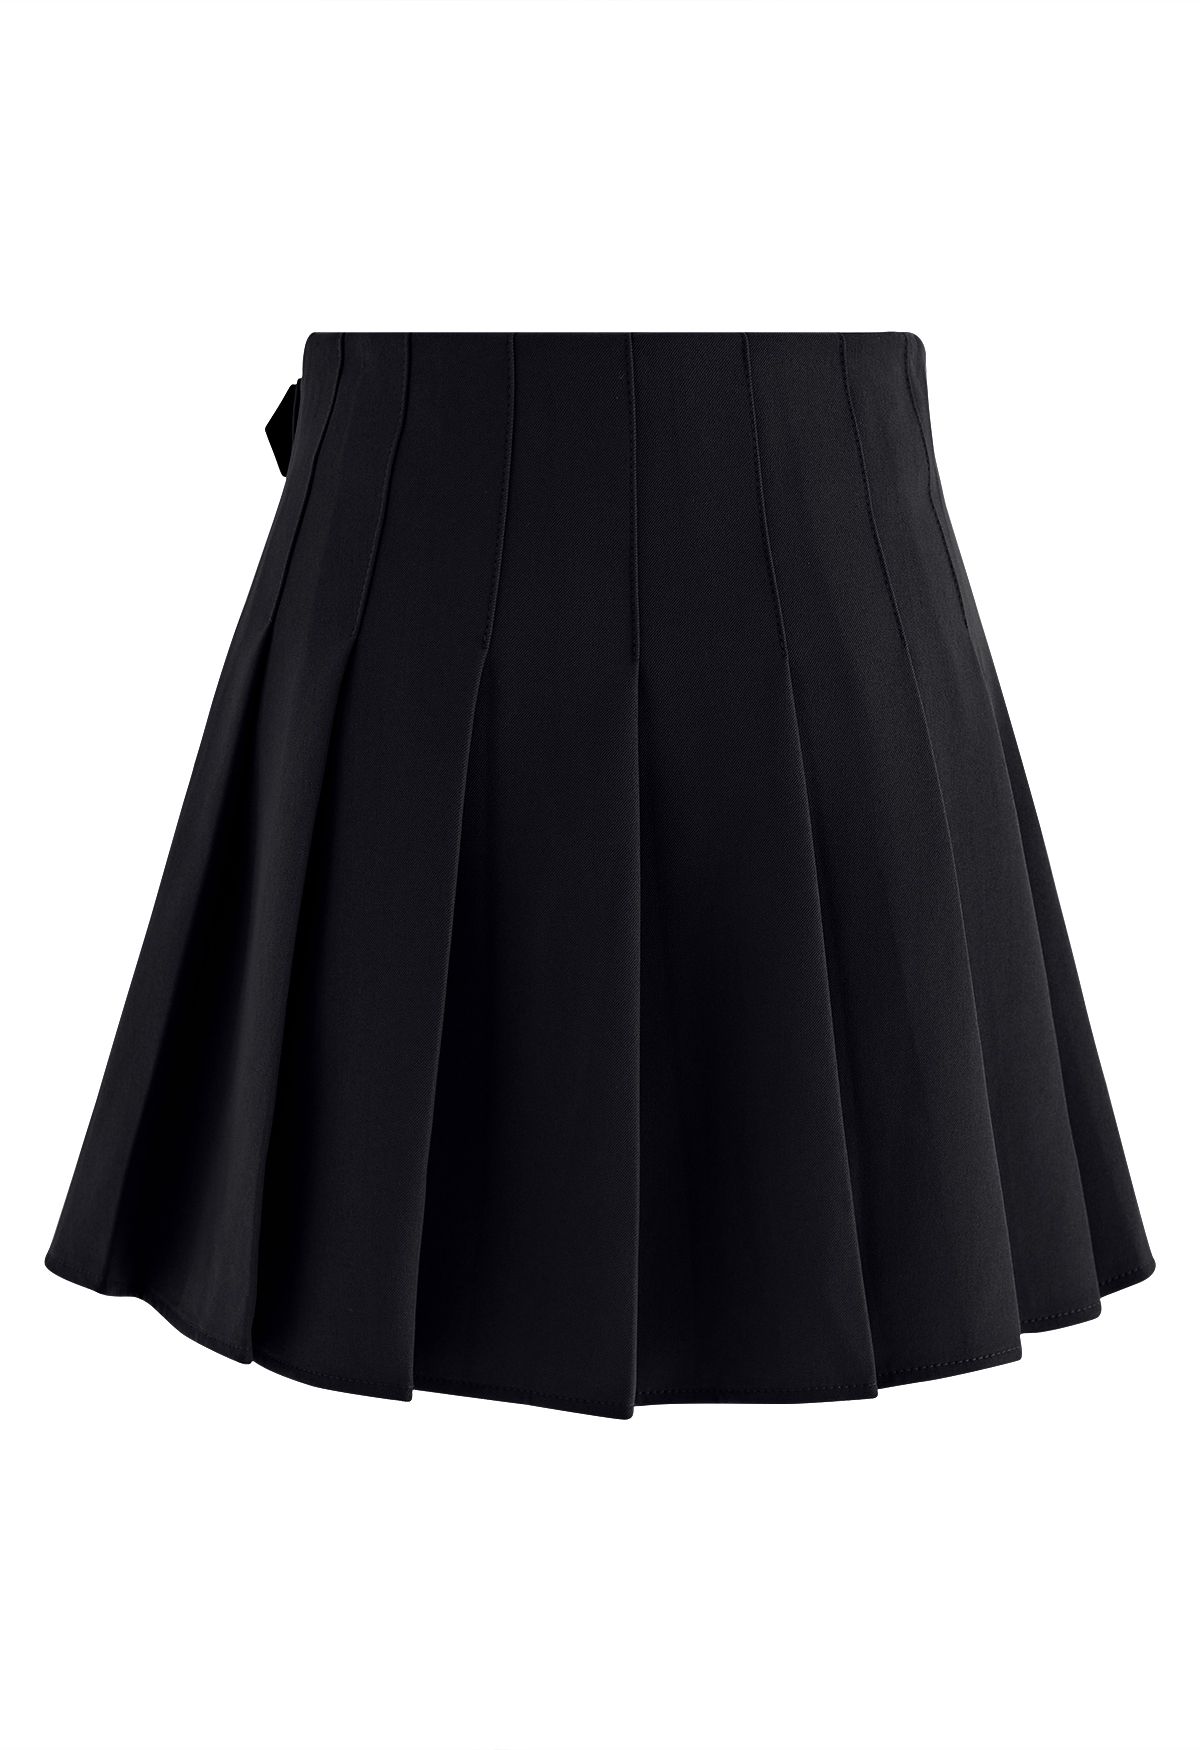 Belted Pleated Flare Mini Skirt in Black - Retro, Indie and Unique Fashion